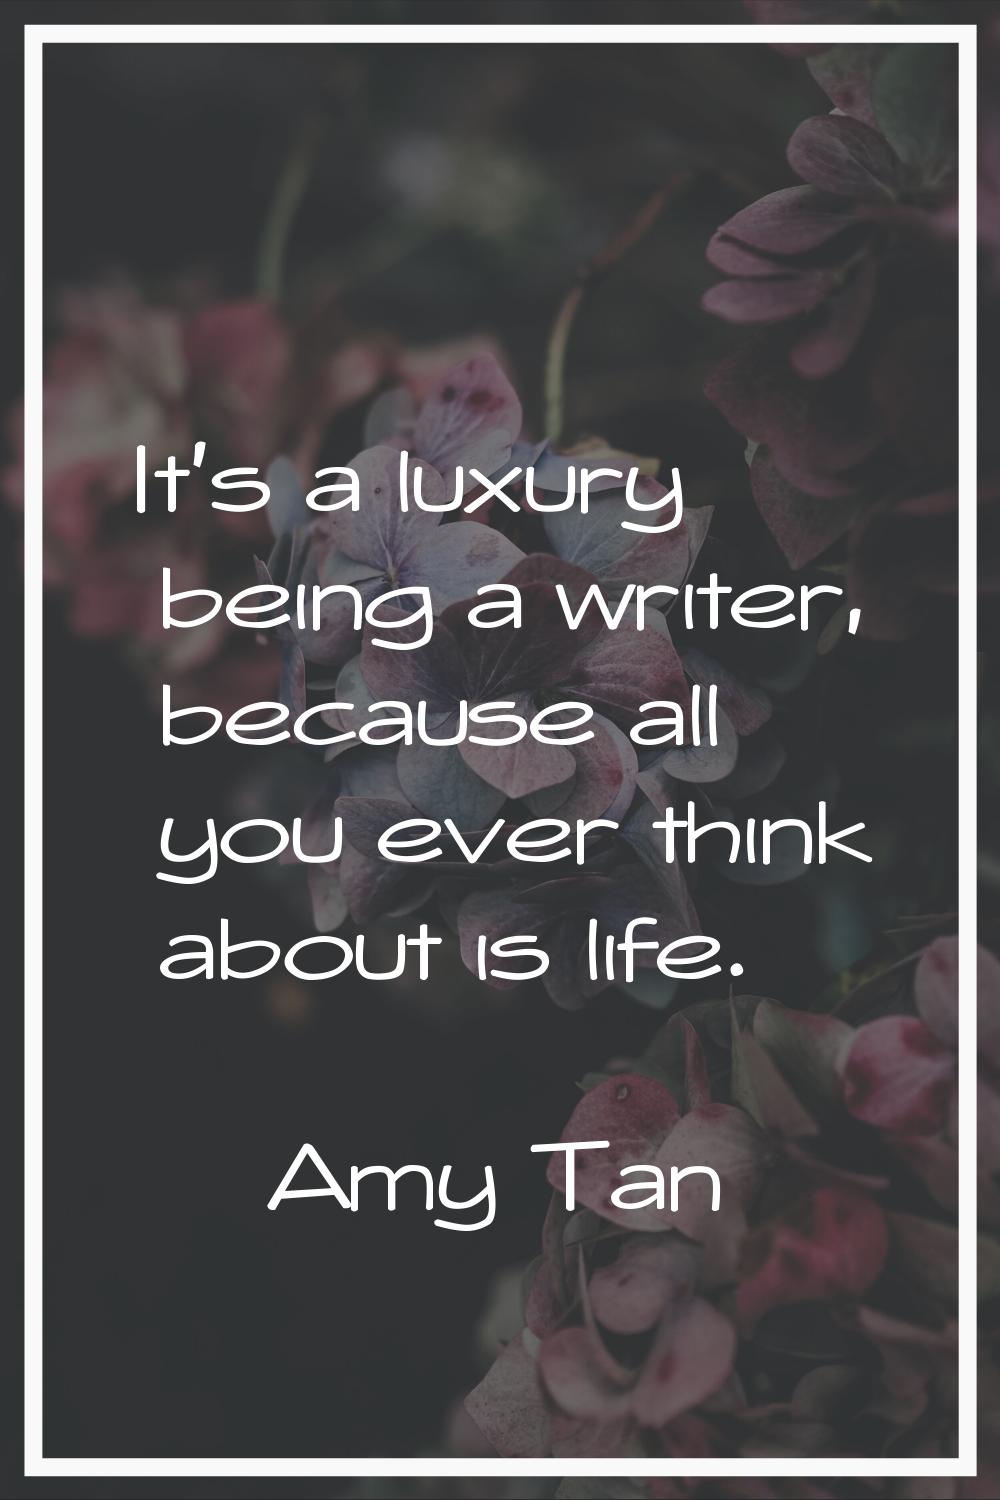 It's a luxury being a writer, because all you ever think about is life.